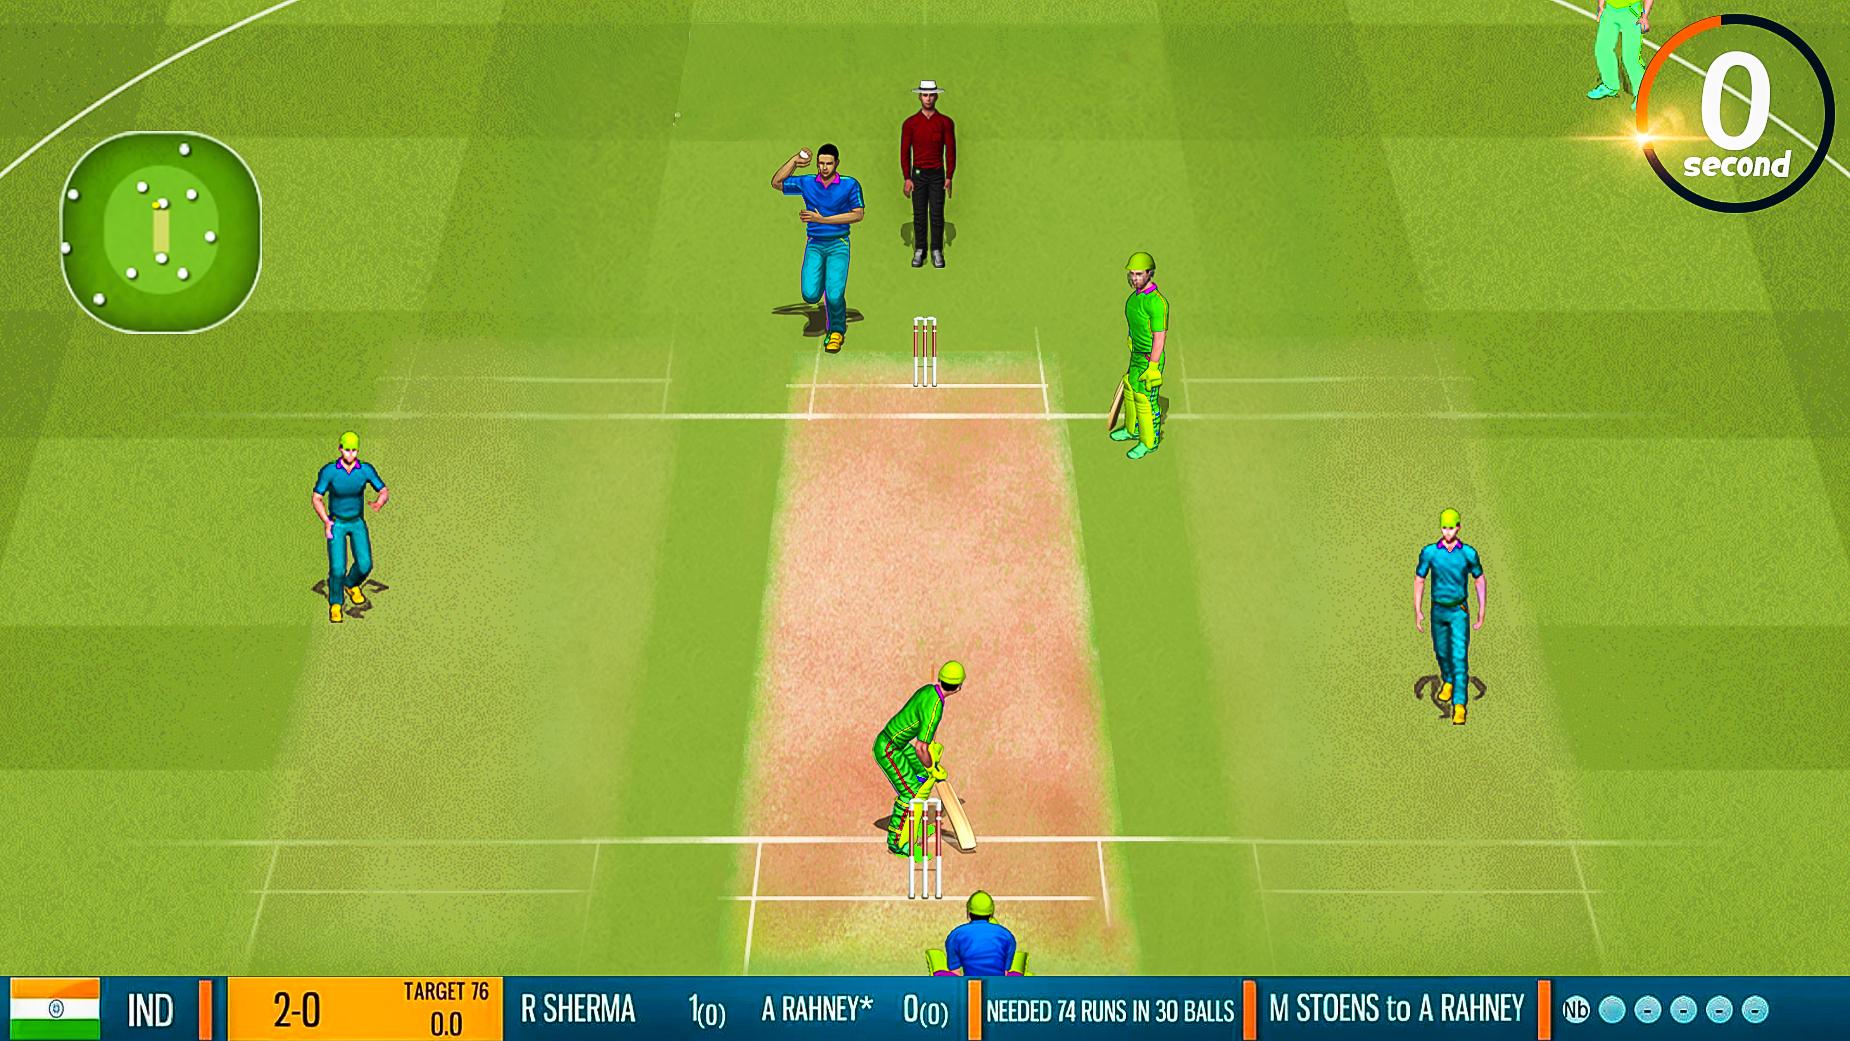 Play With Friends-Real Cricket Craze 1.1 Screenshot 3